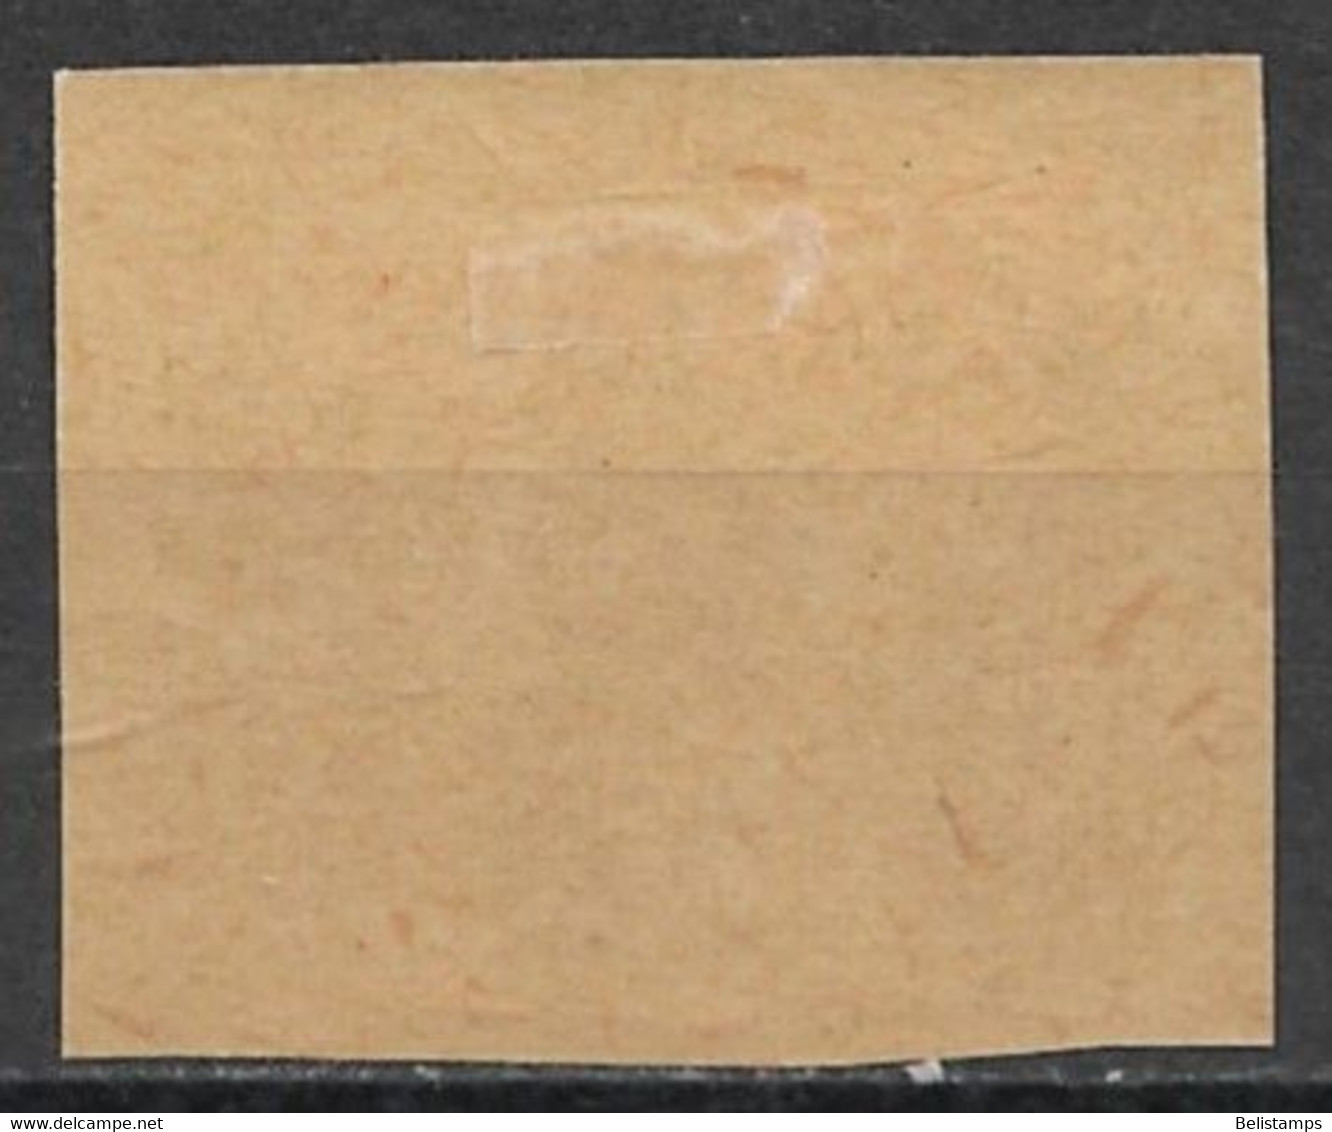 Poland 1946. Scott #J110 (U) Post Horn With Thunderbolts - Postage Due